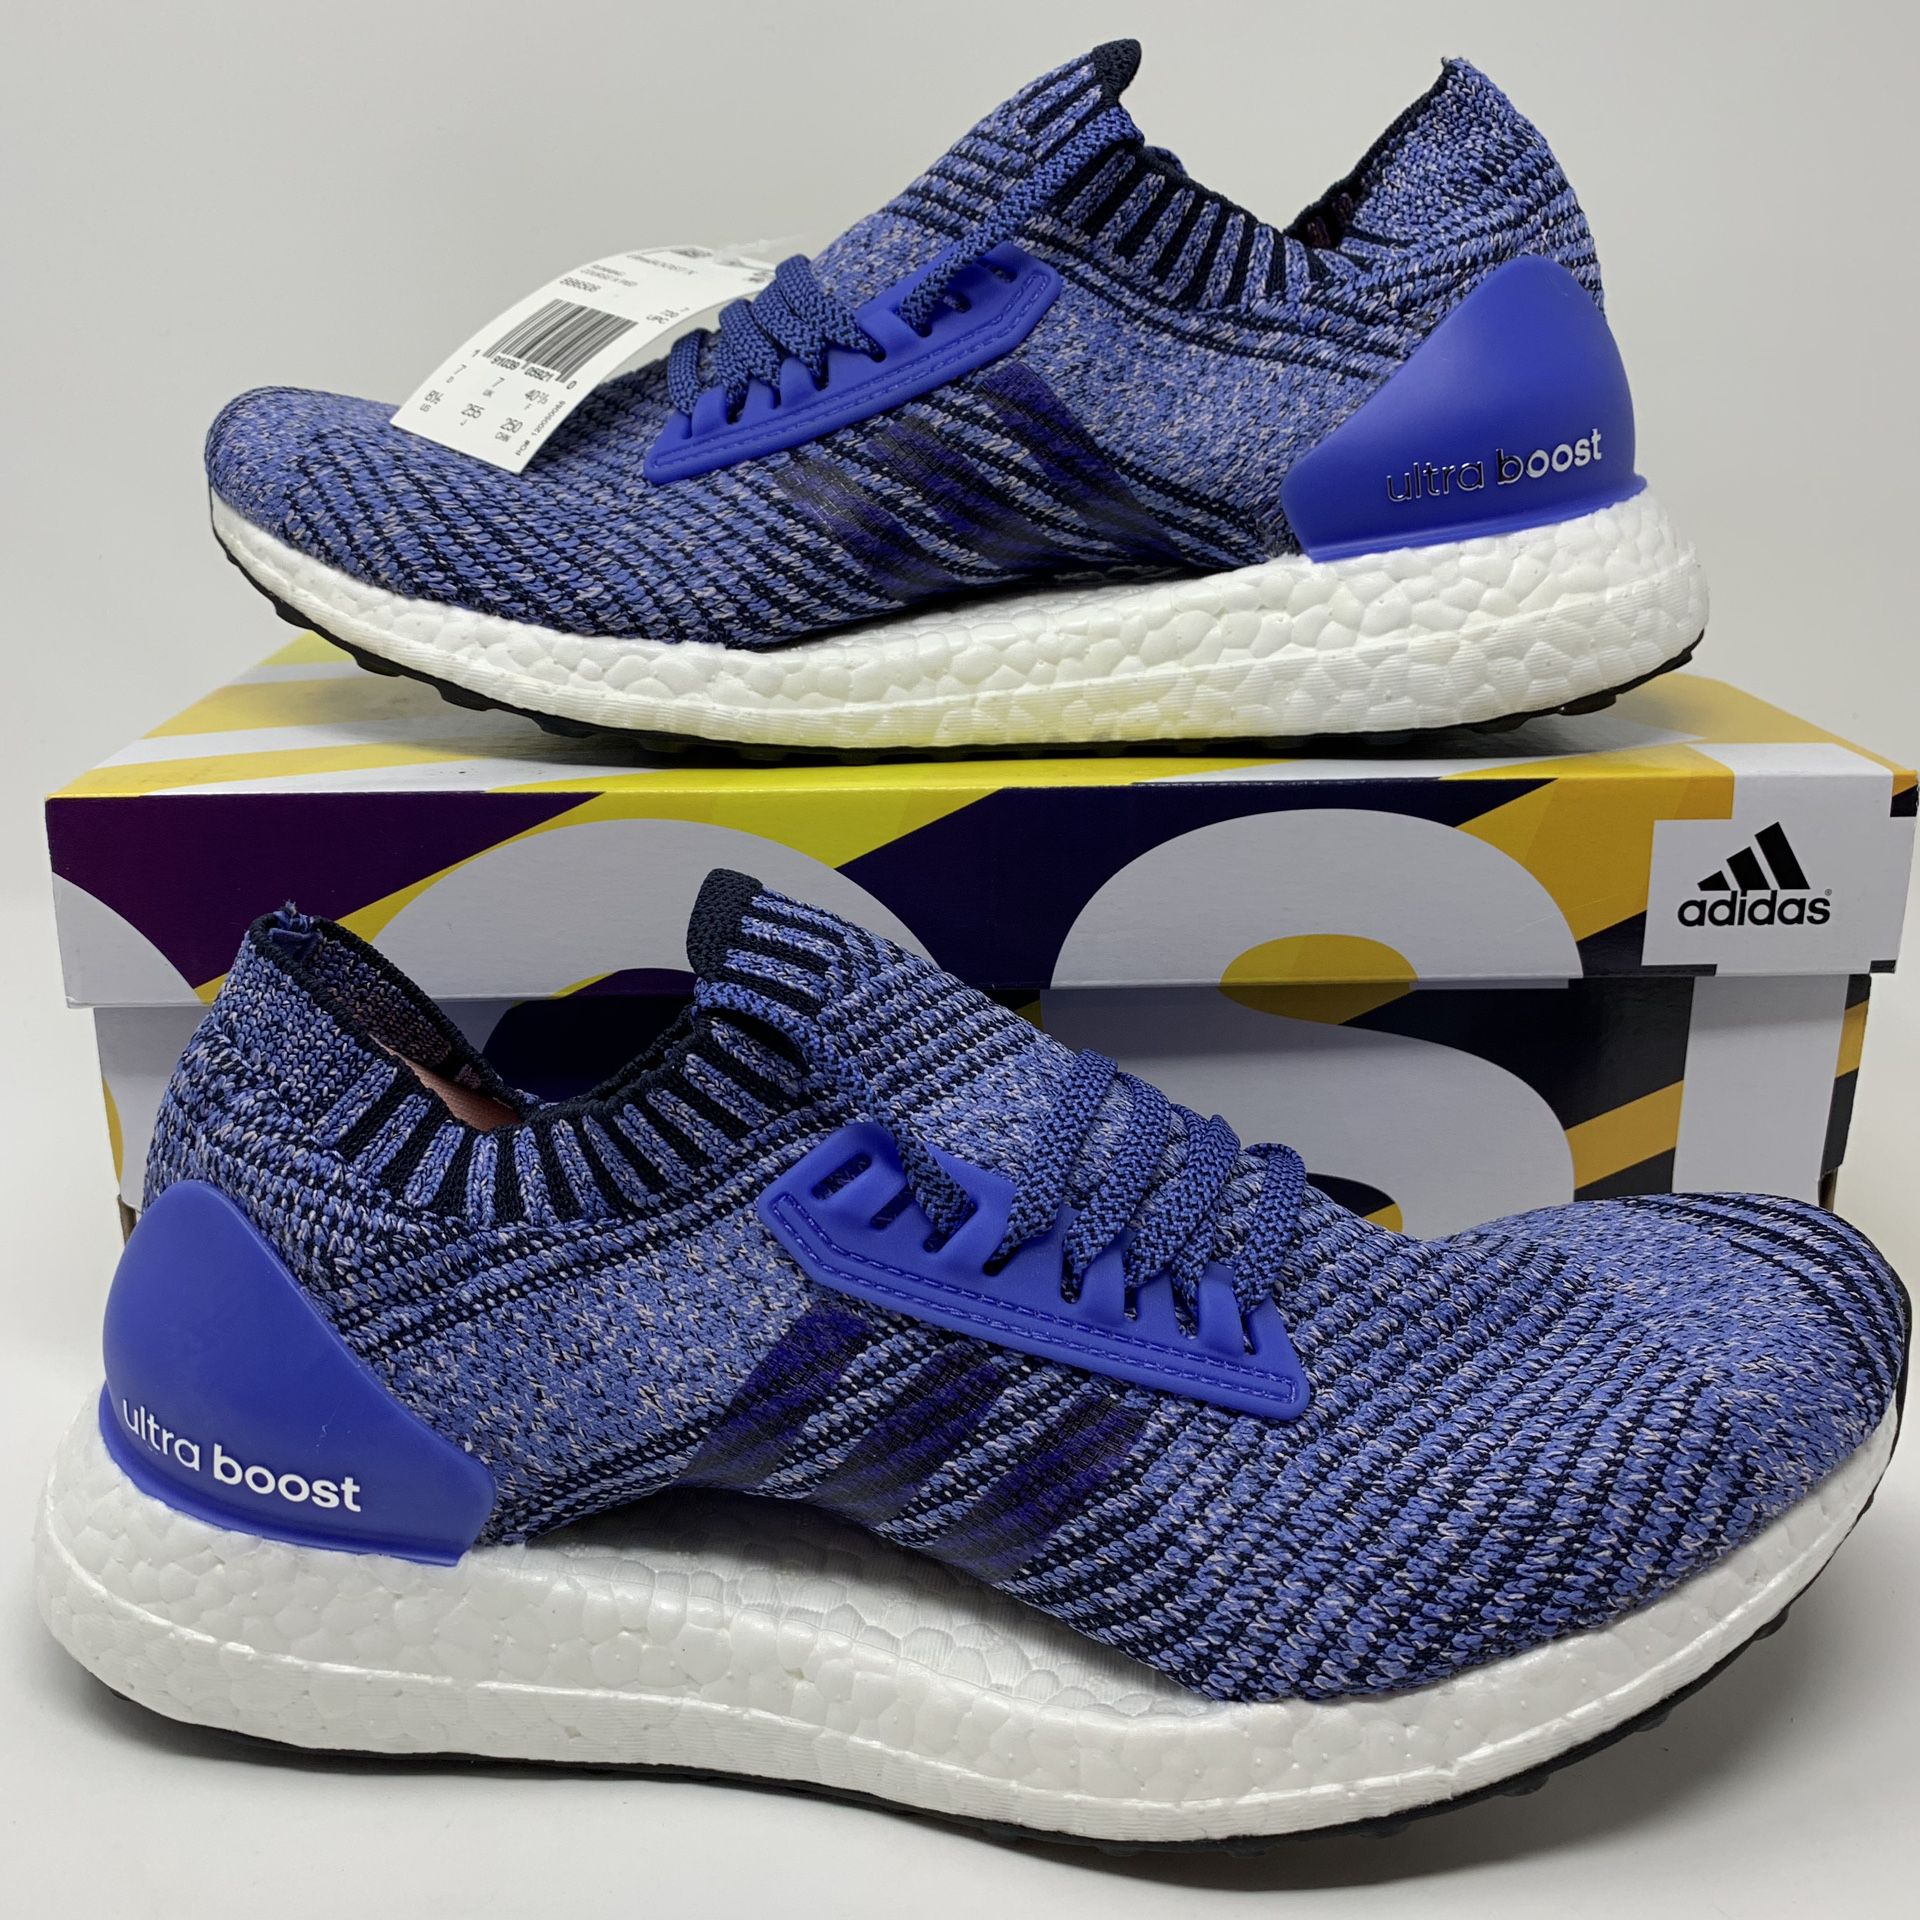 🆕 adidas Women’s UltraBoost X Running Shoes - Real Lilac/Legend Ink - Sizes 8, 8.5 (BB6508)